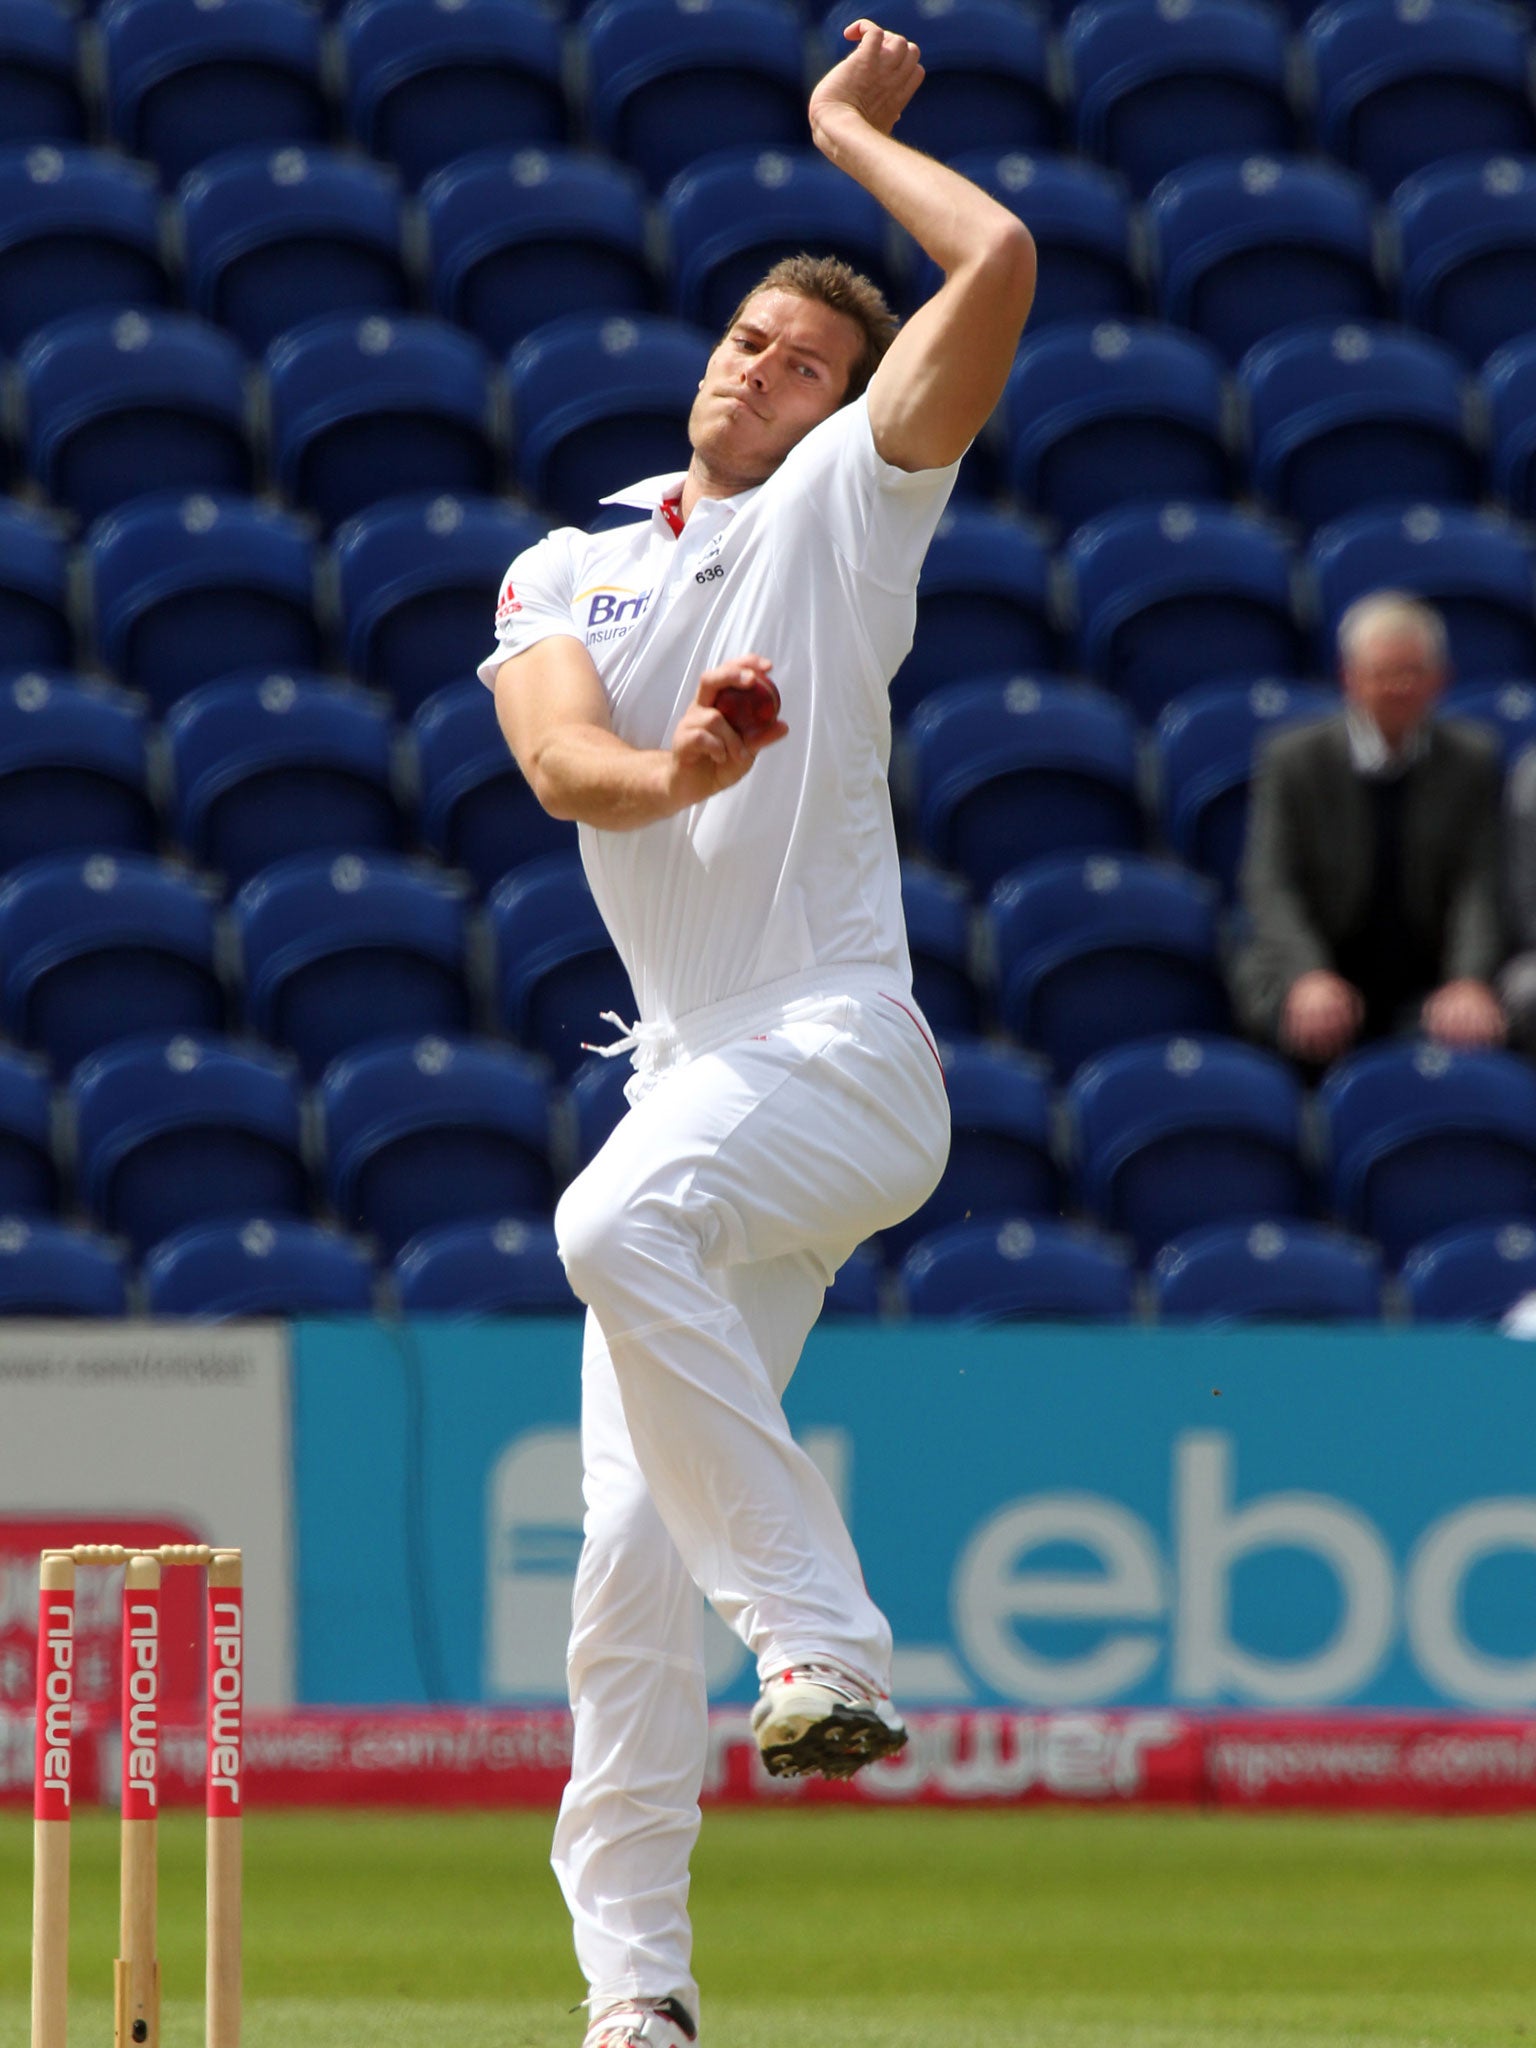 Chris Tremlett has been called up to the England squad for the third Test